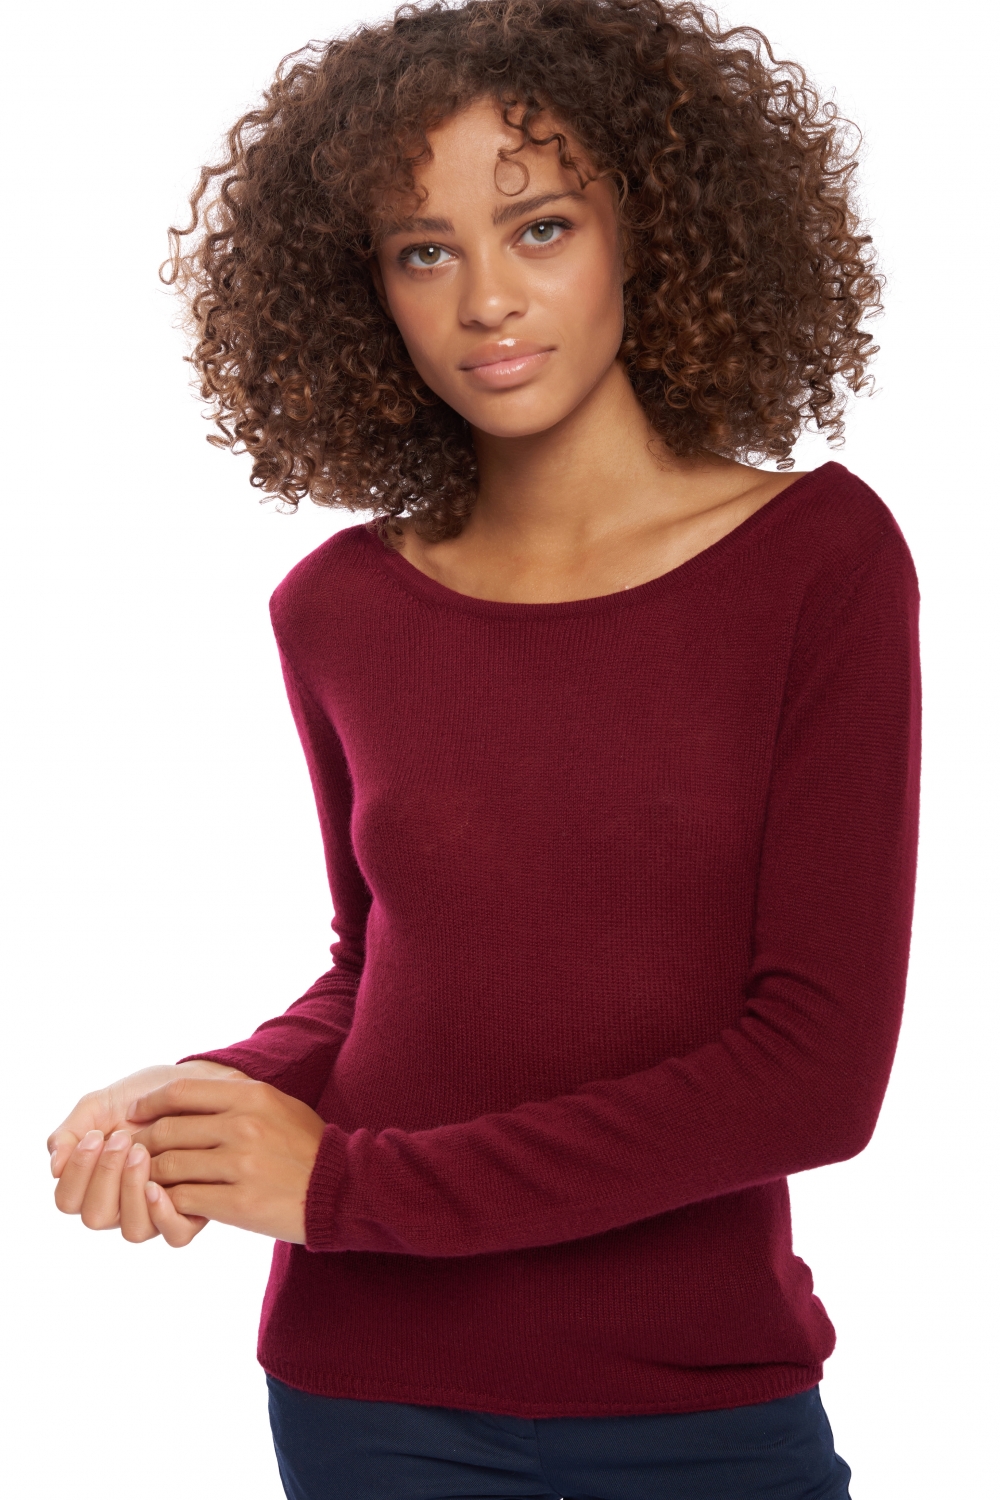 Cashmere ladies basic sweaters at low prices caleen bordeaux xs